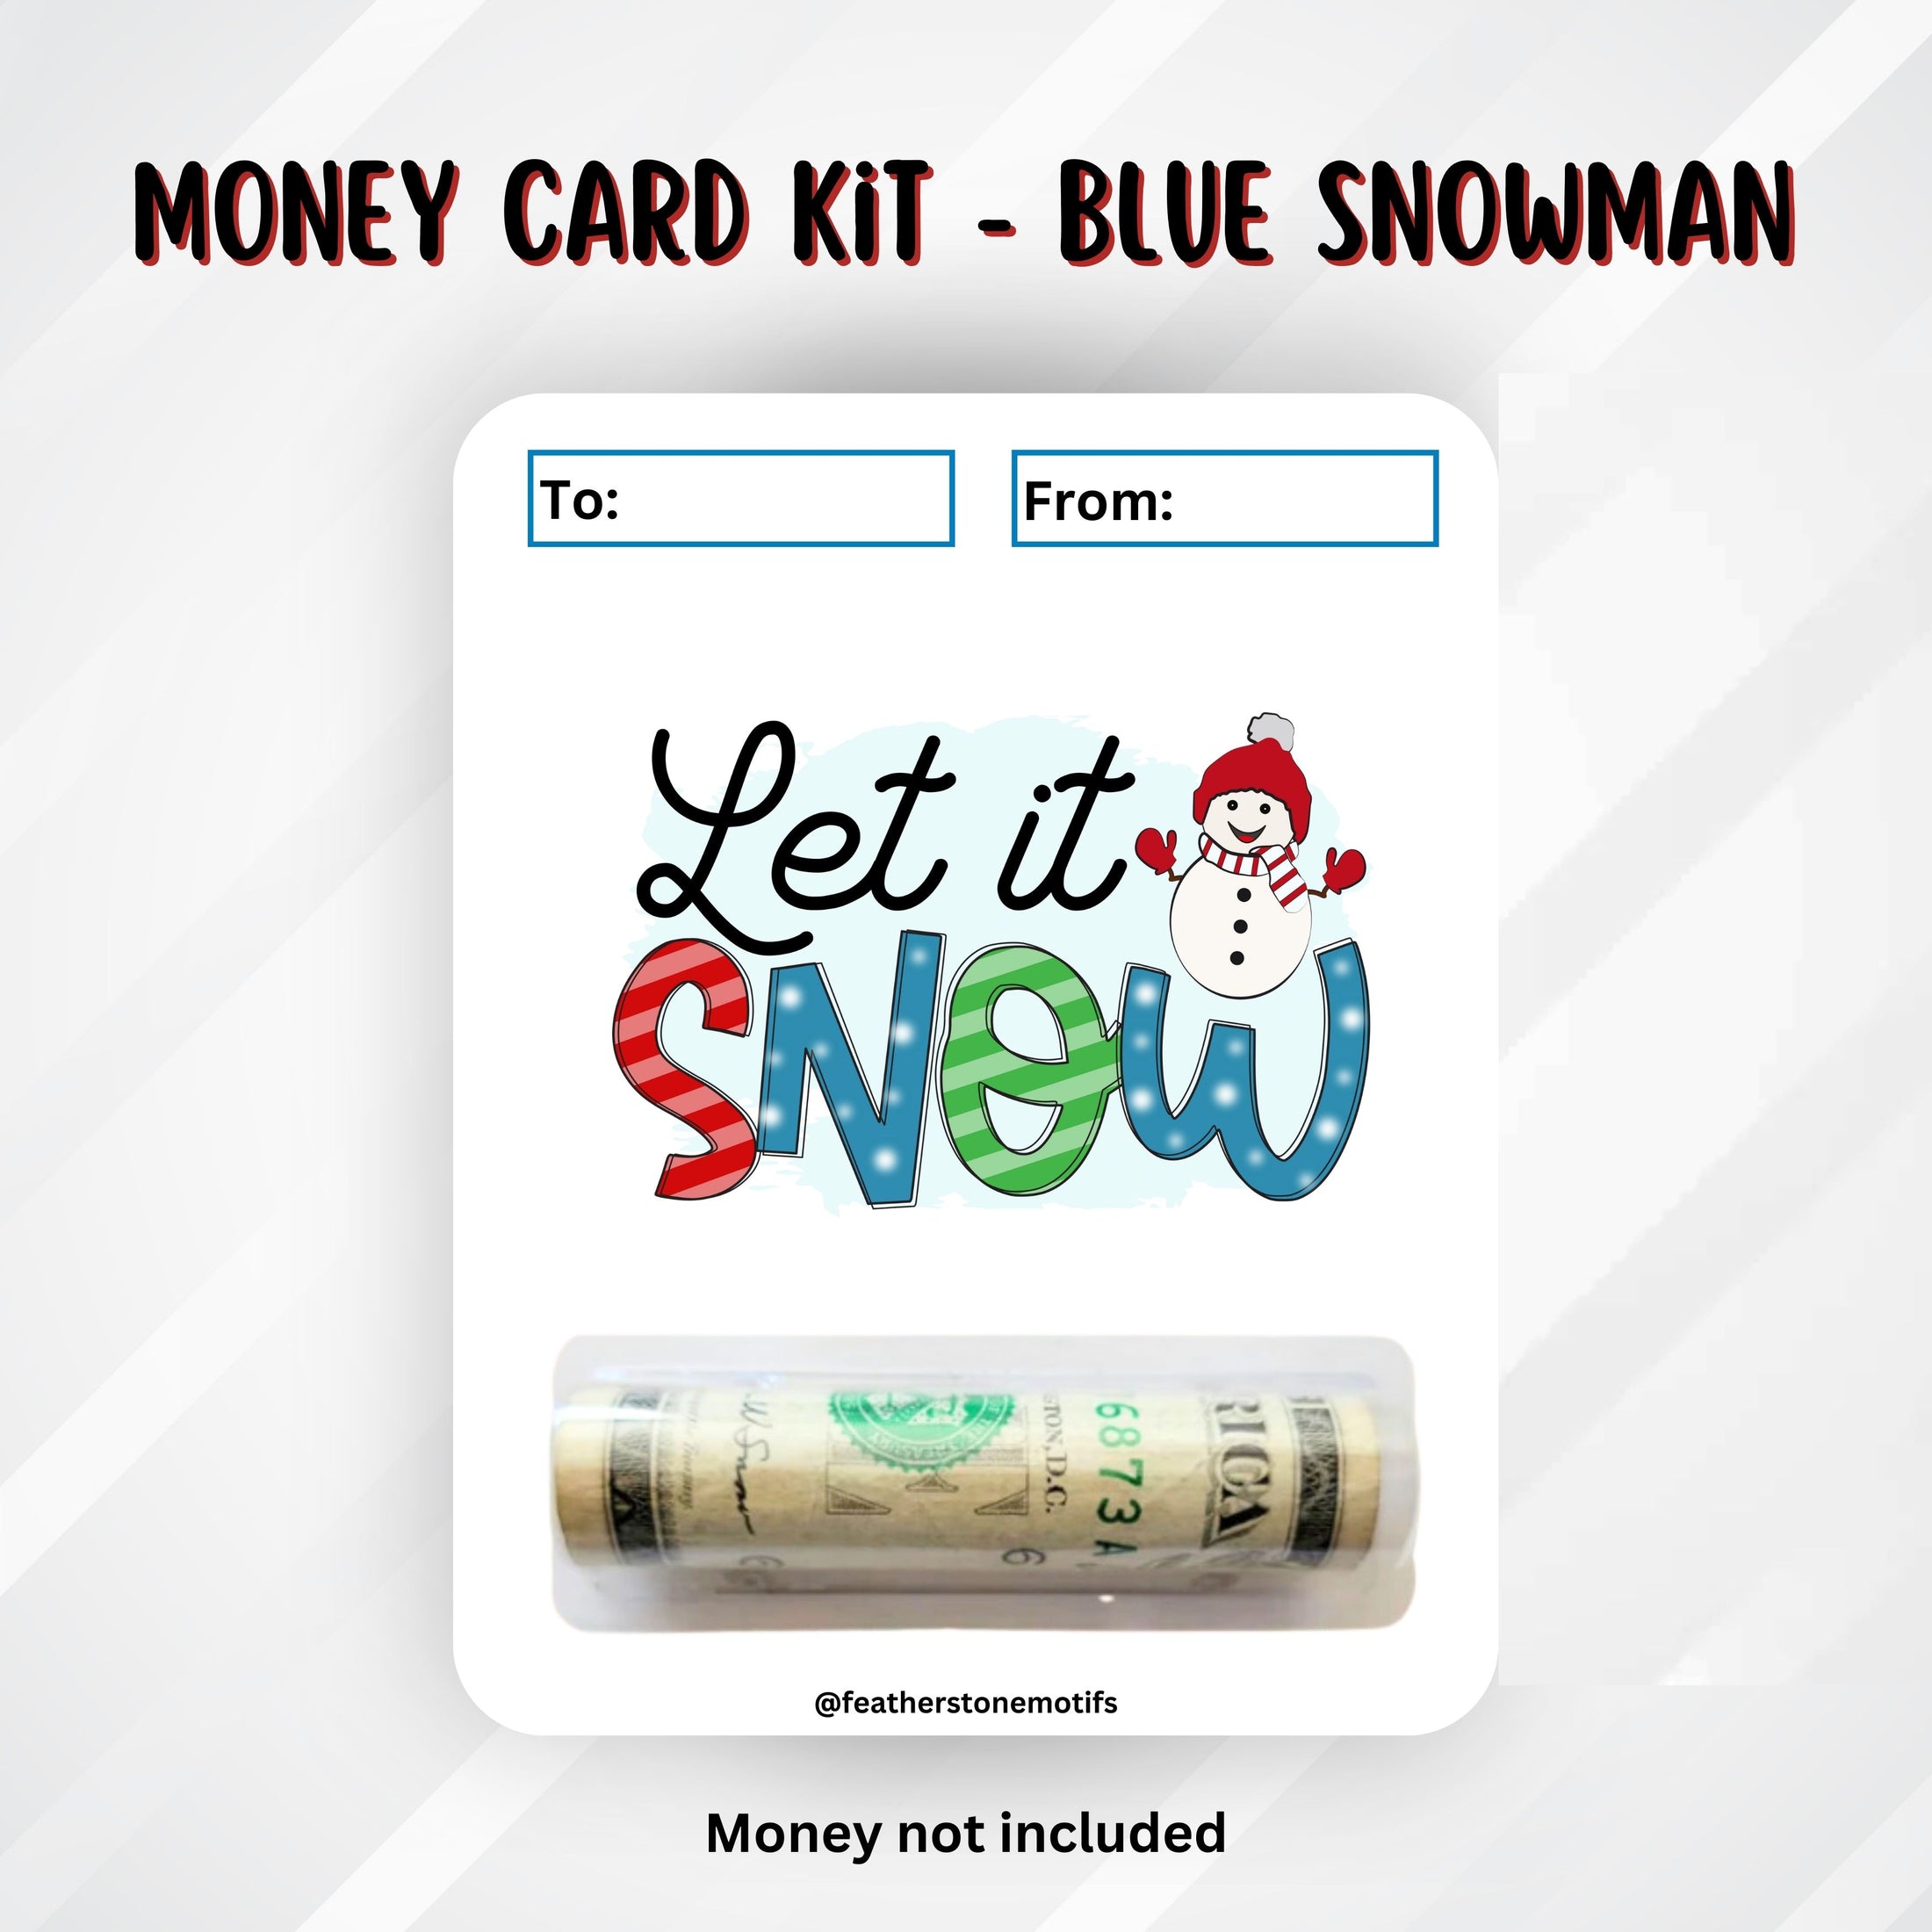 This image shows the money tube attached to the Let it Snow Money Card.